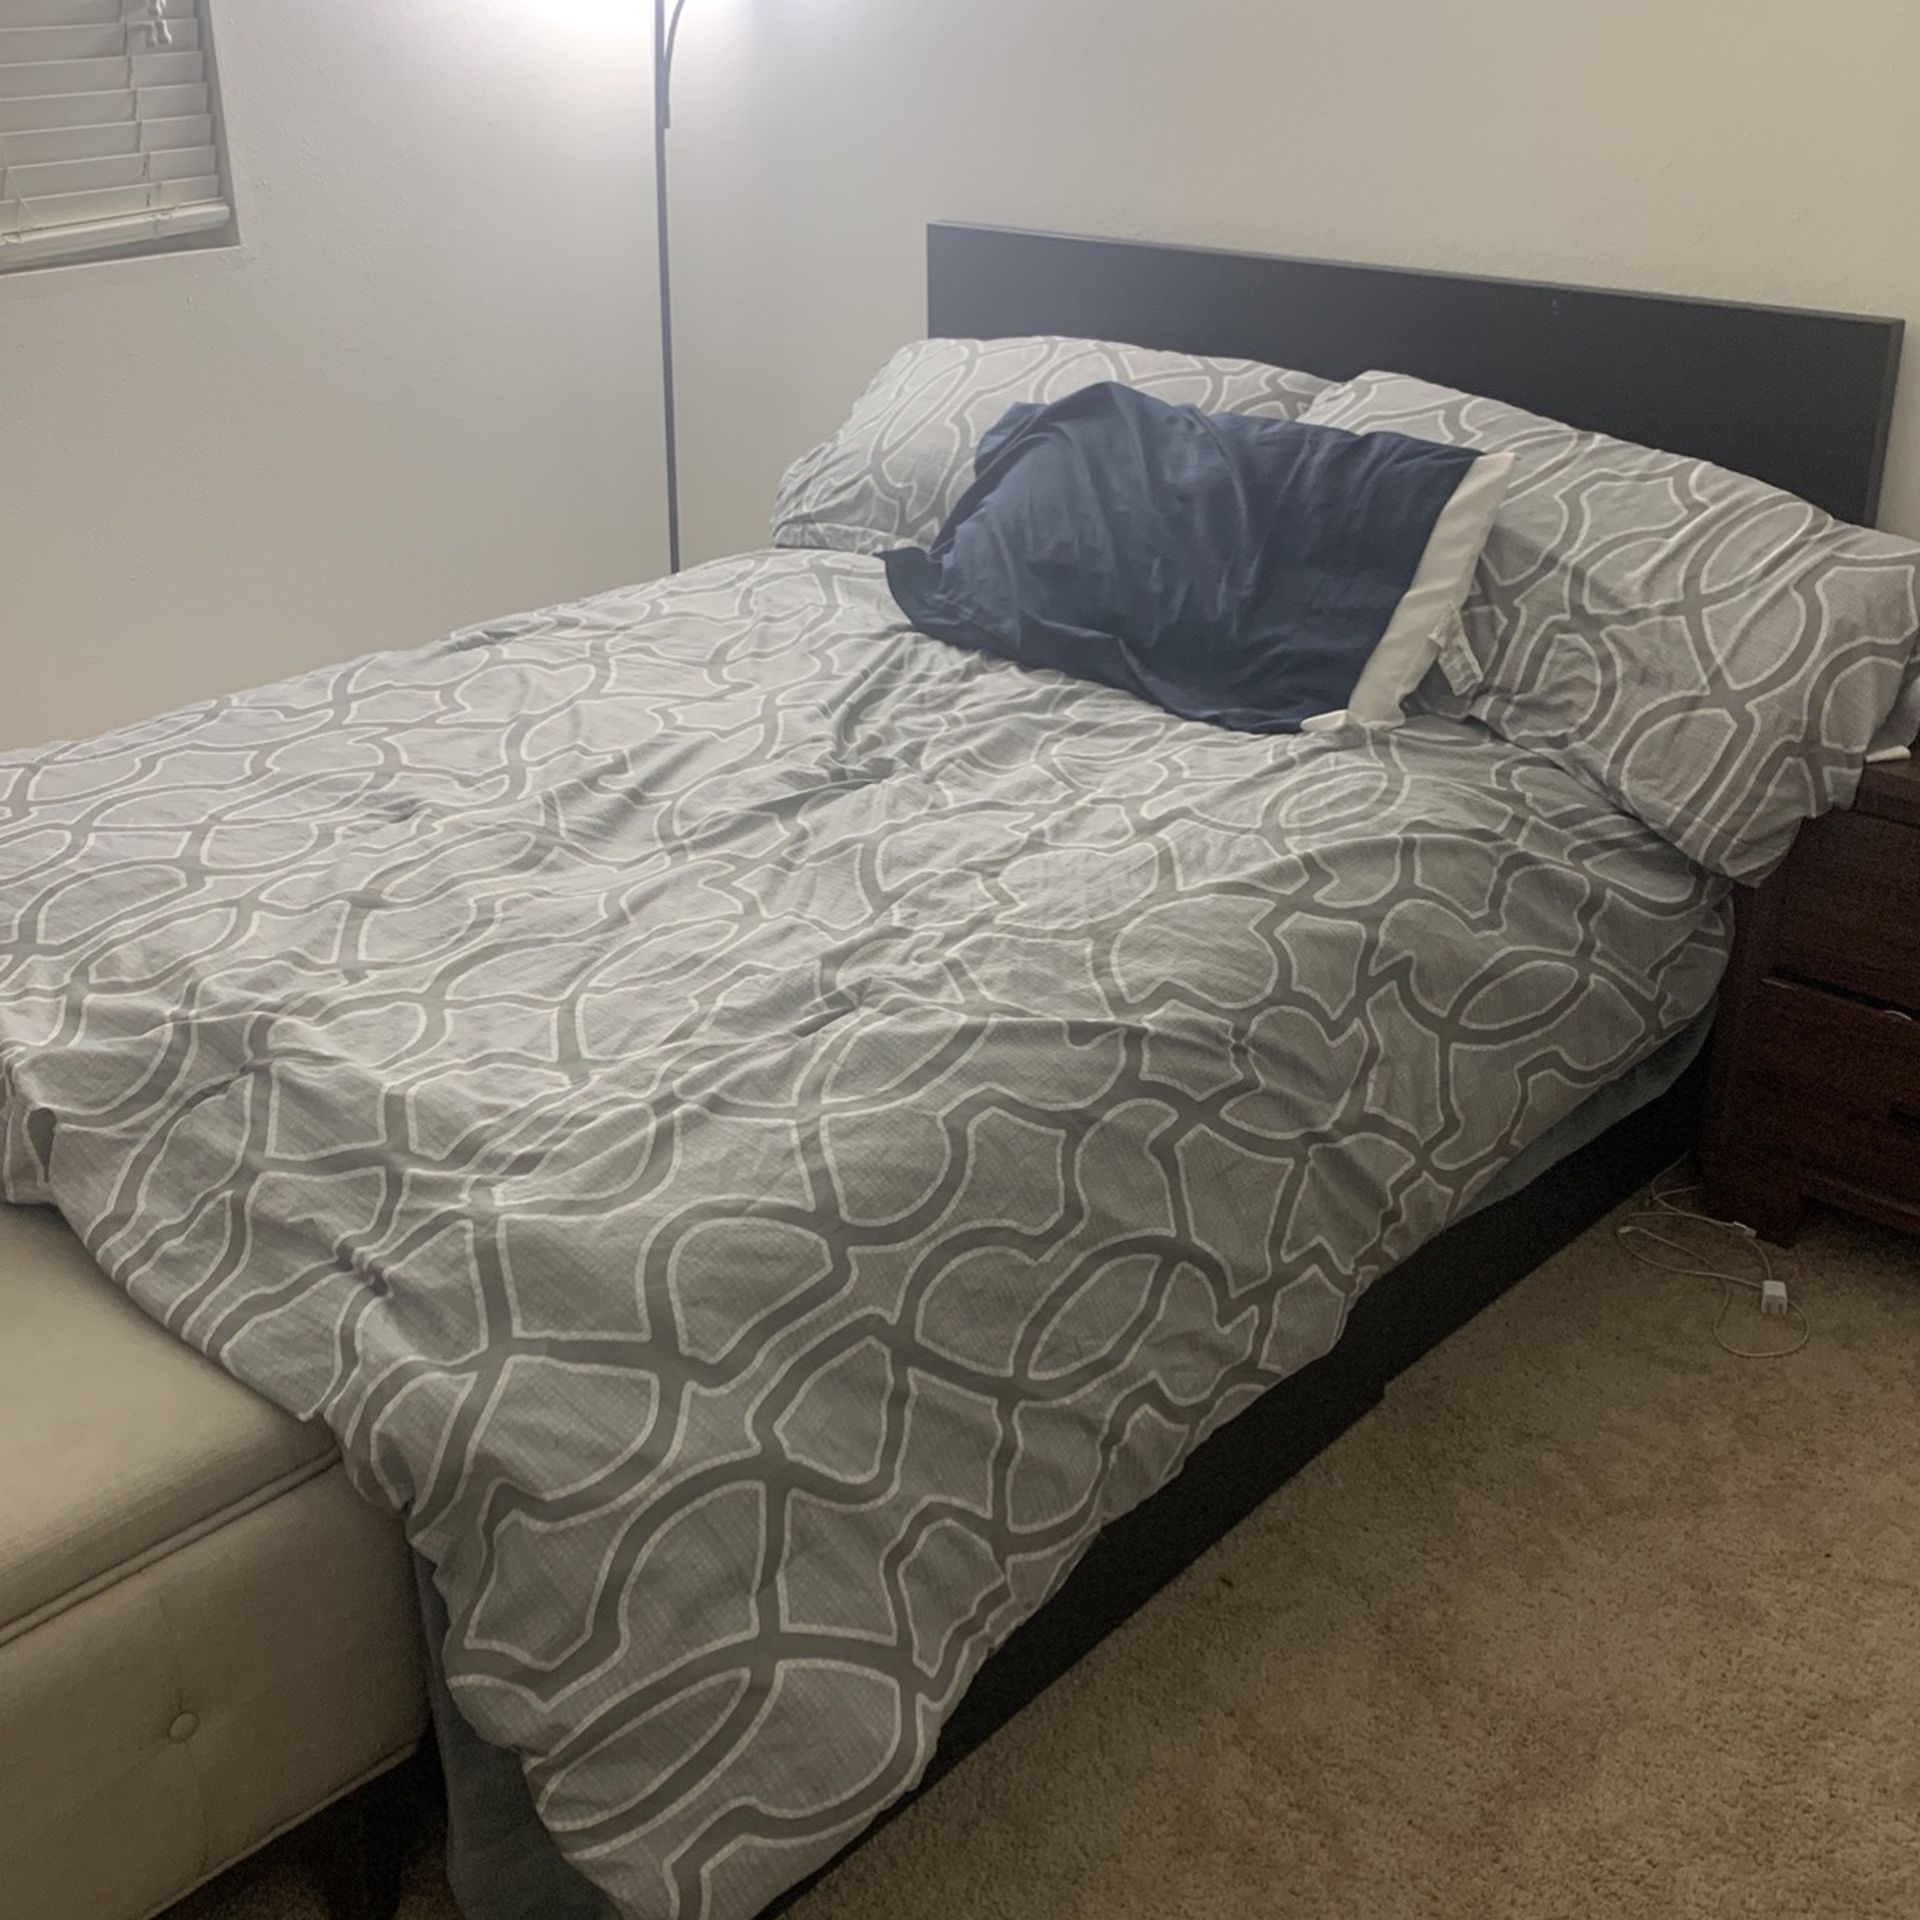 Full Bed For Sale - Mattress Included - Great Condition